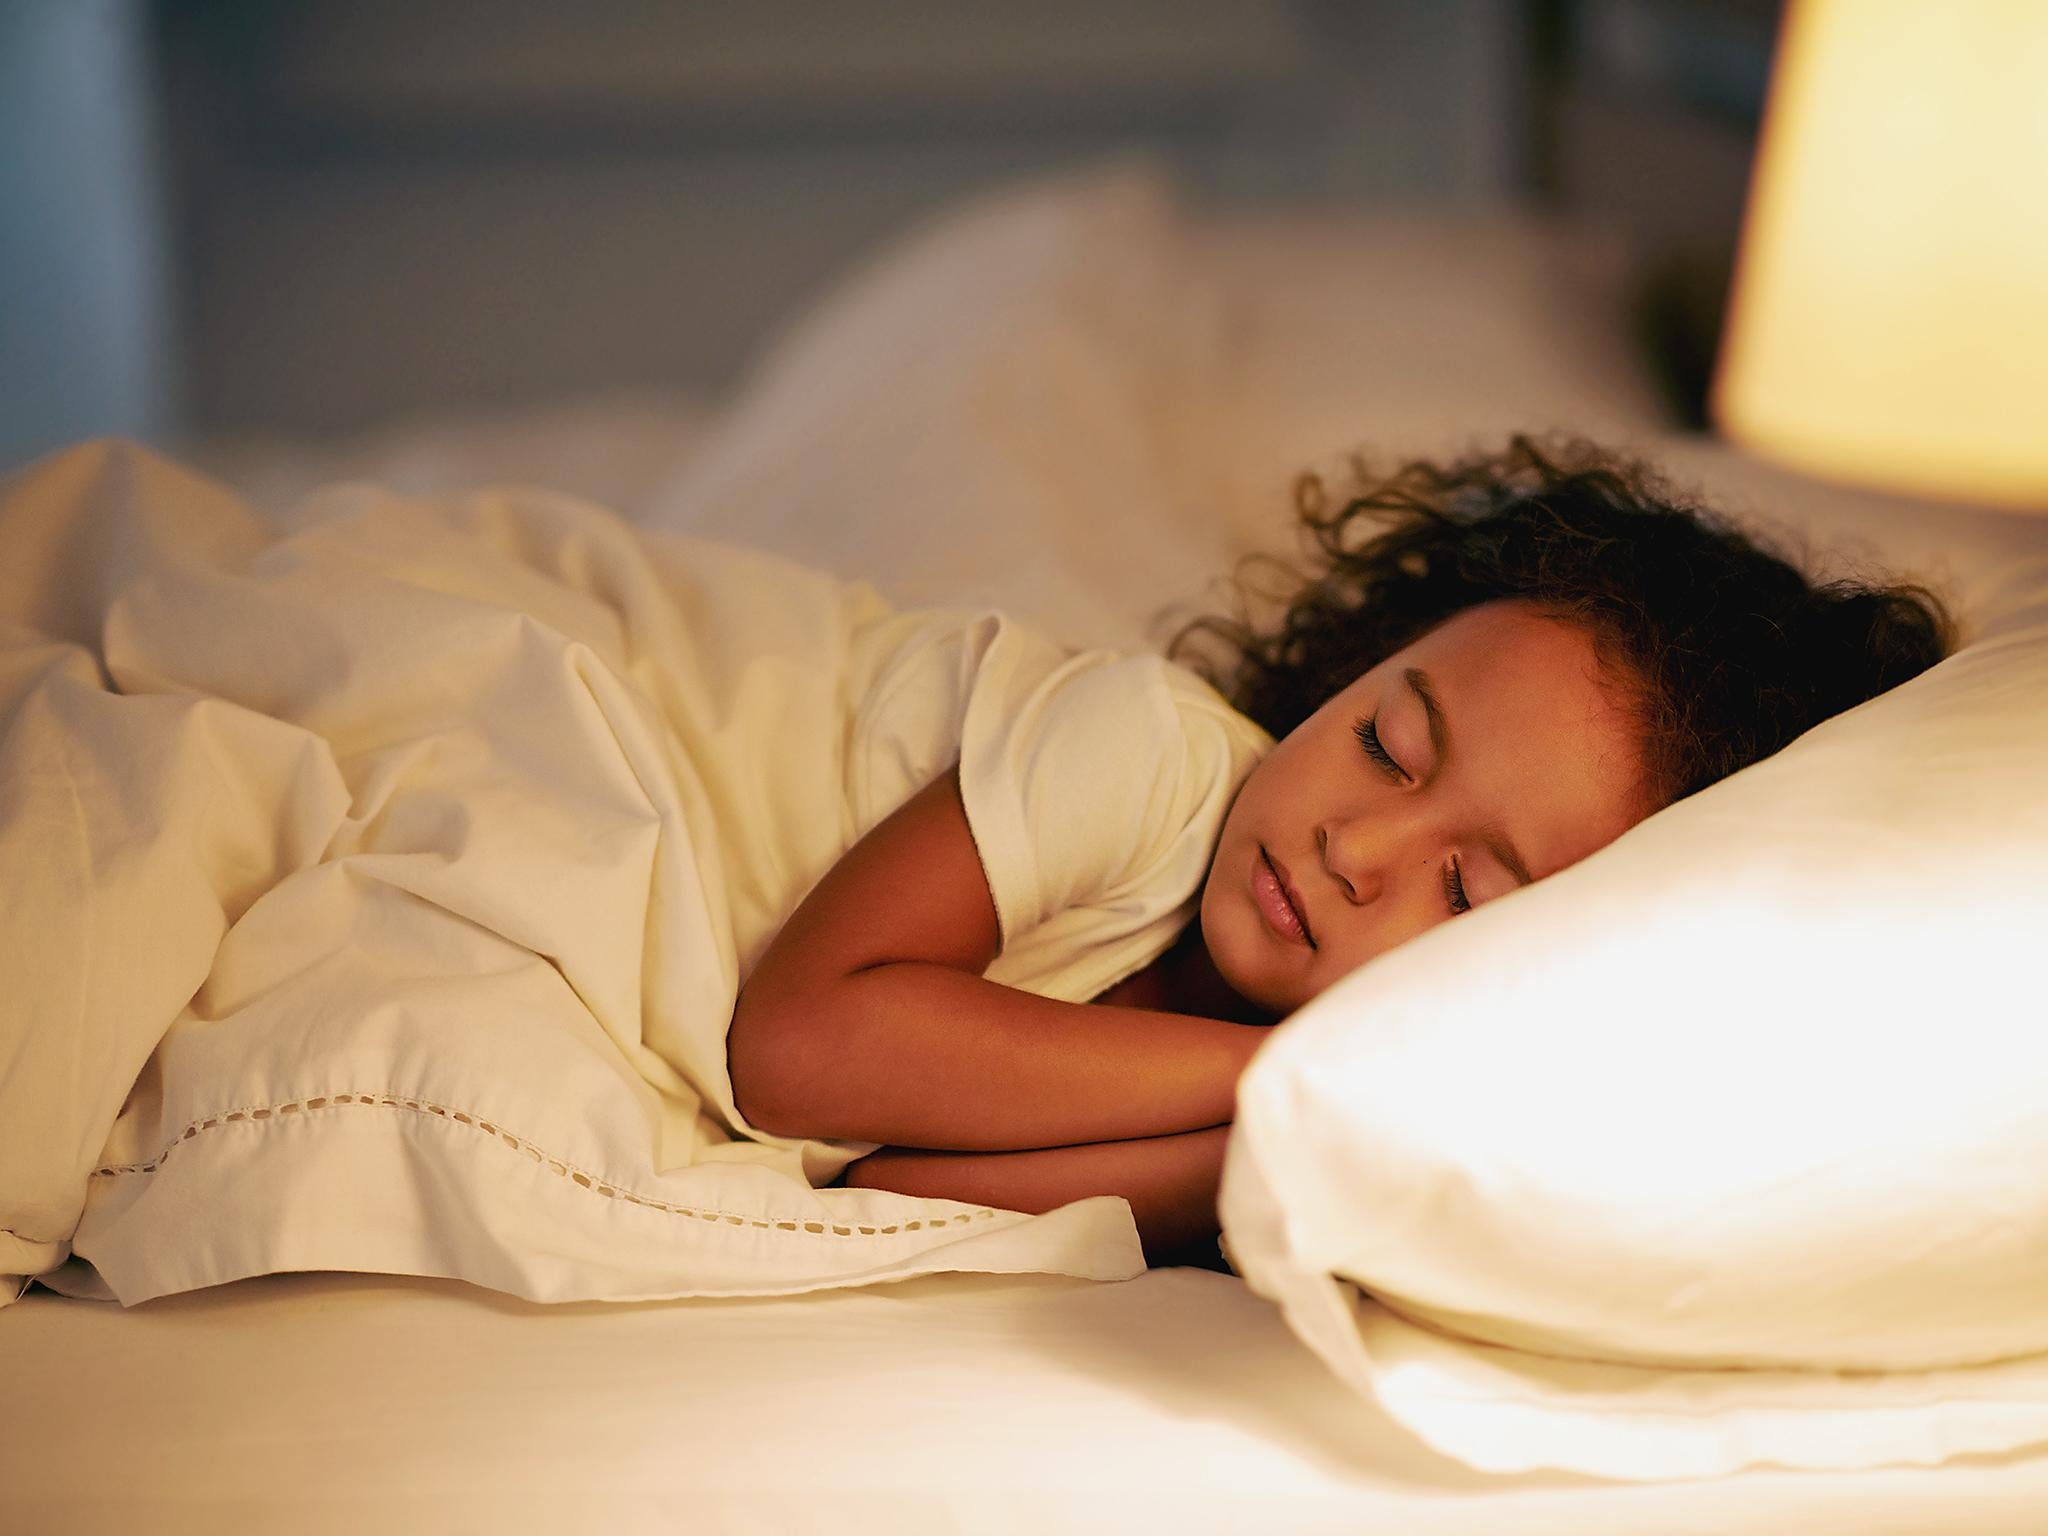 Do not feel guilty for sending your child to bed early